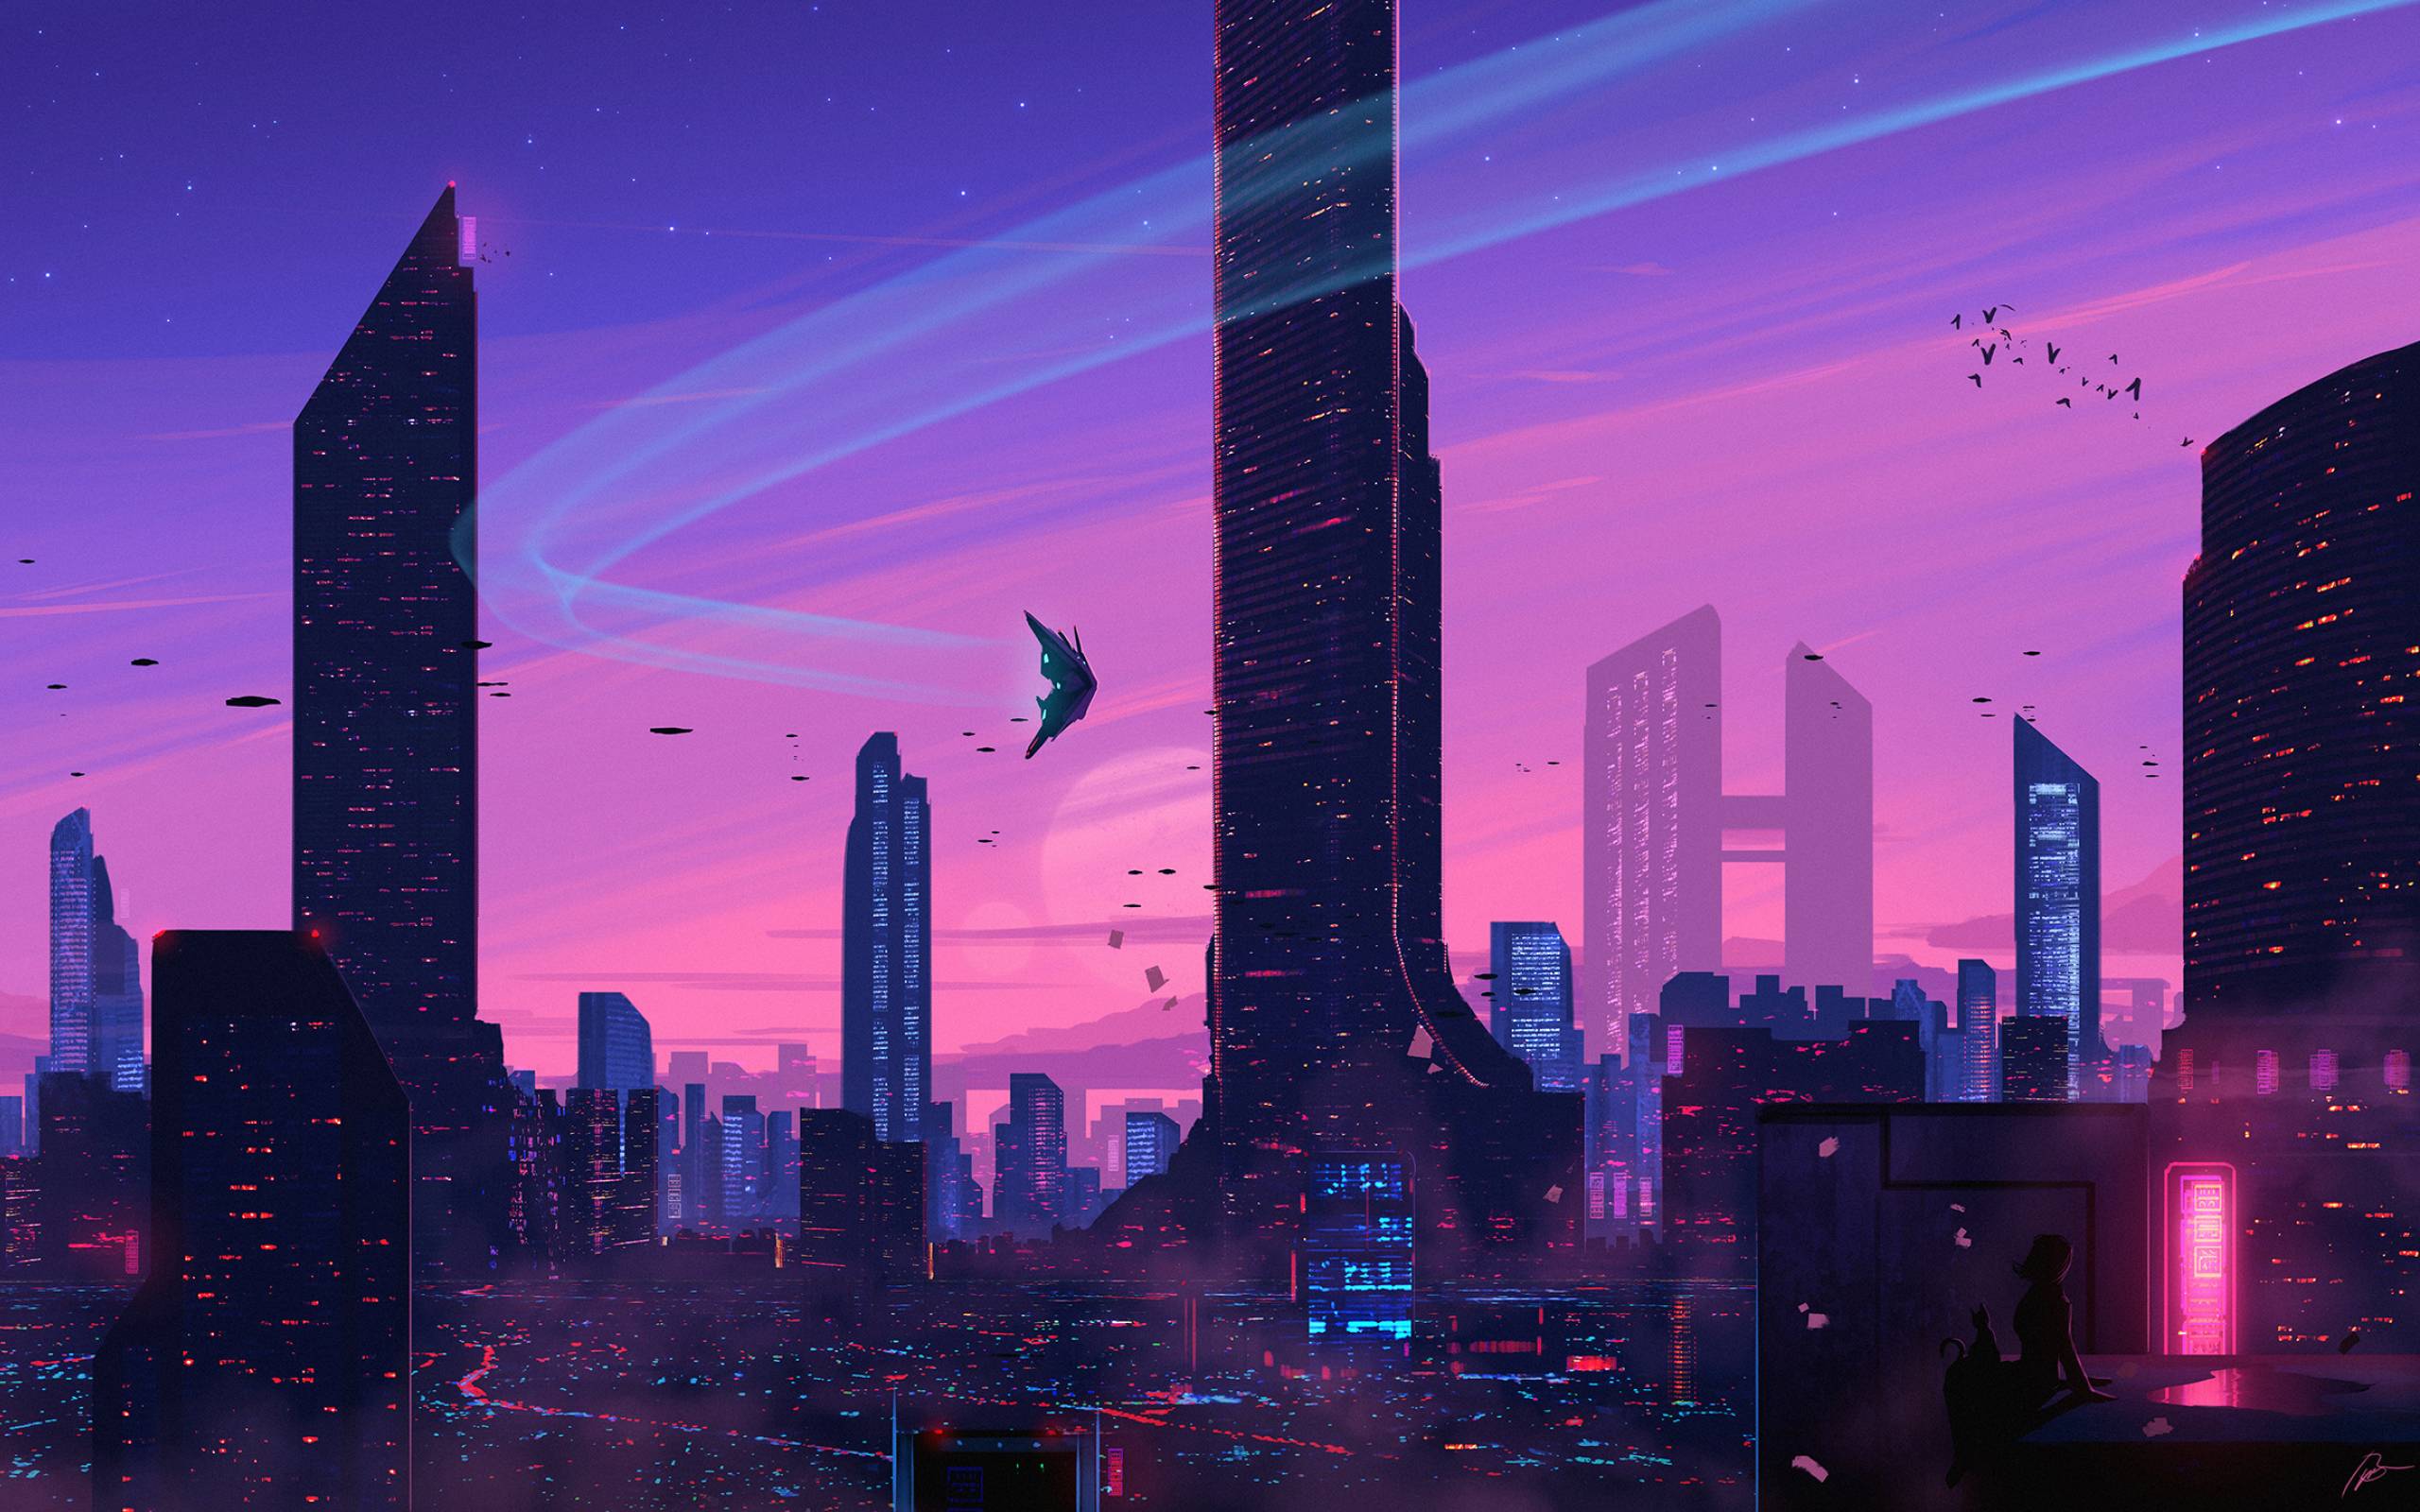 A city with tall buildings and flying objects - 2560x1600